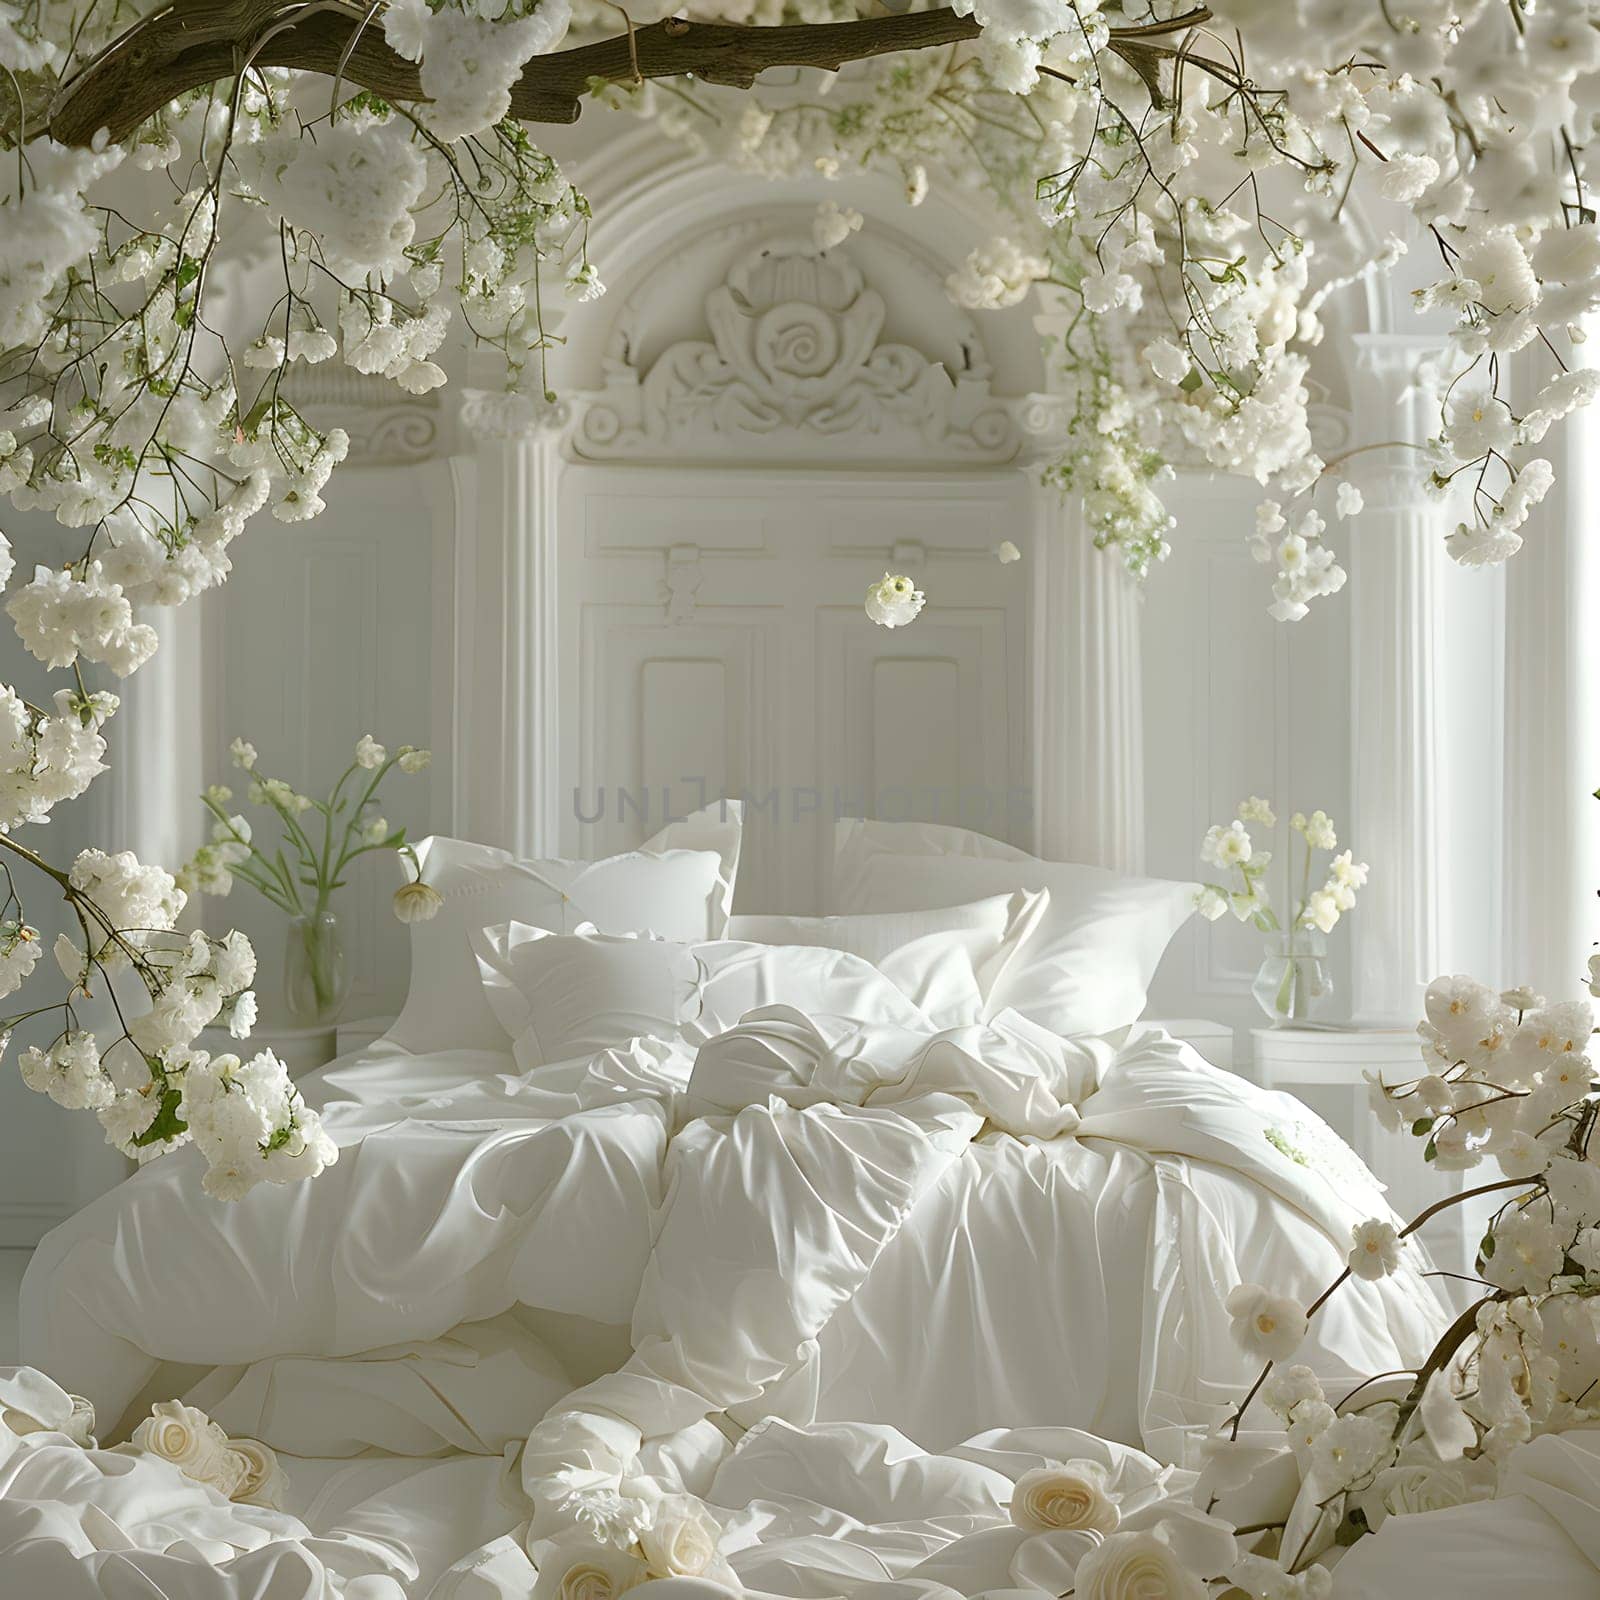 A bed with white sheets and pillows placed under a tree with white flowers, creating a serene and beautiful outdoor decoration with a touch of nature